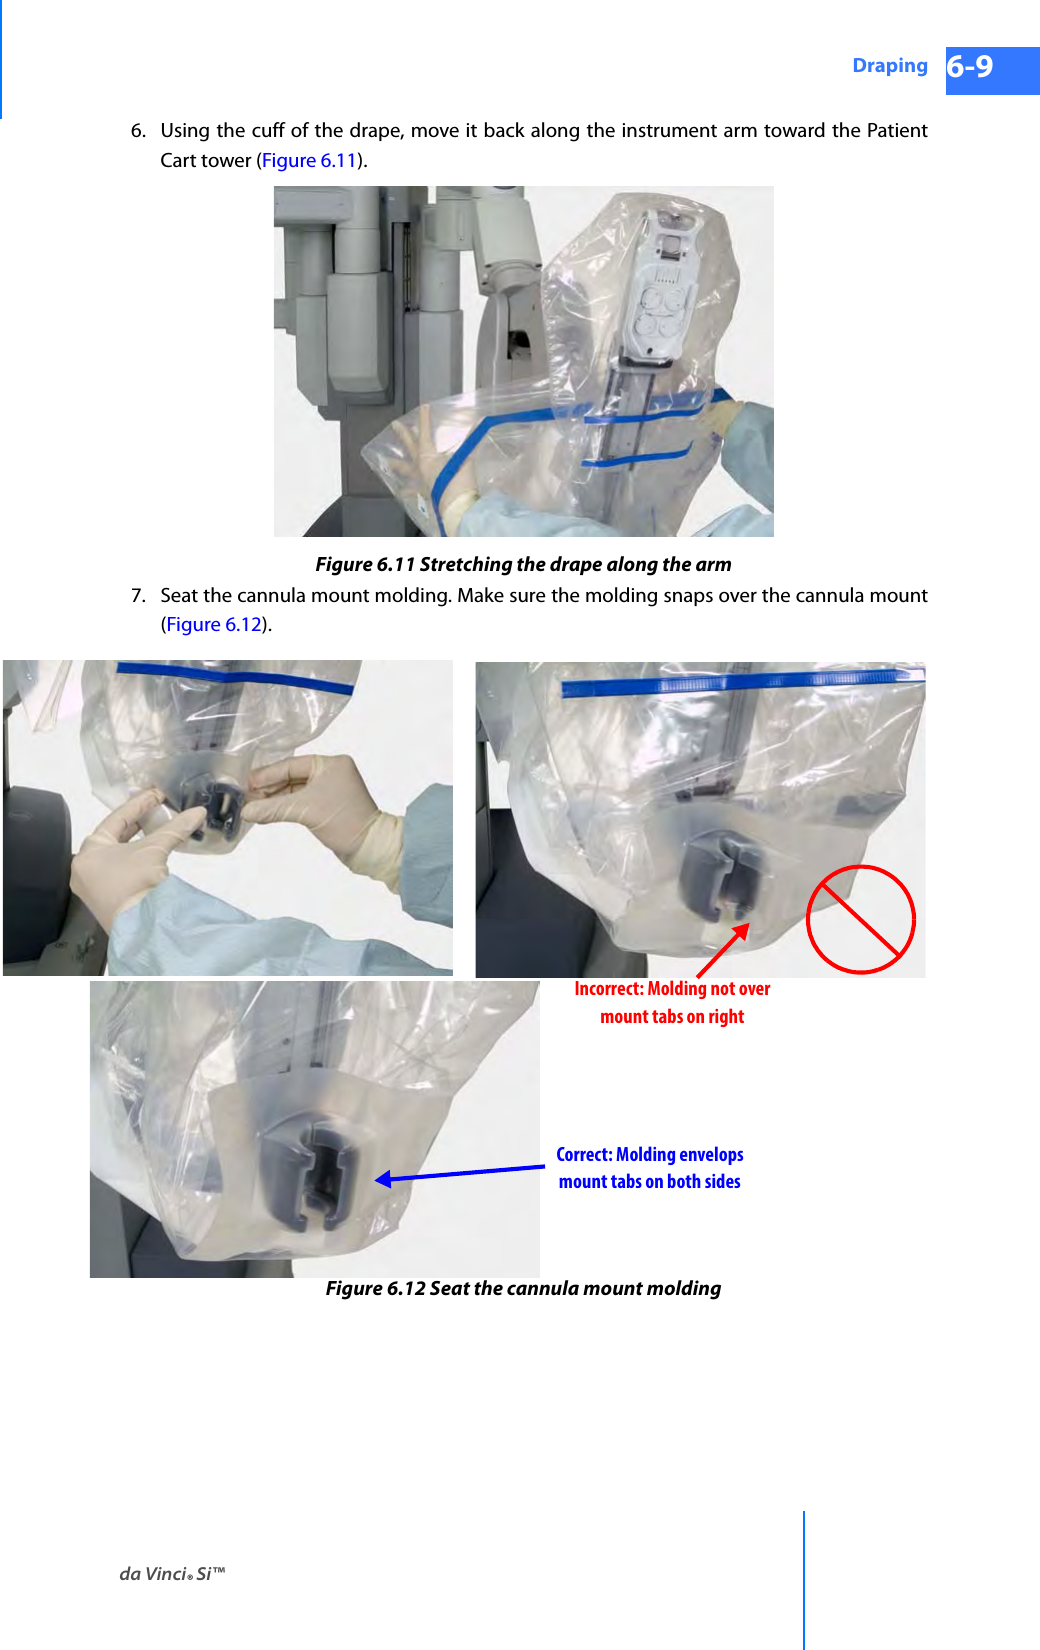 da Vinci® Si™Draping 6-9DRAFT/PRE-RELEASE/CONFIDENTIAL 10/9/146. Using the cuff of the drape, move it back along the instrument arm toward the Patient Cart tower (Figure 6.11).Figure 6.11 Stretching the drape along the arm7. Seat the cannula mount molding. Make sure the molding snaps over the cannula mount (Figure 6.12).Figure 6.12 Seat the cannula mount moldingIncorrect: Molding not overmount tabs on rightCorrect: Molding envelopsmount tabs on both sides